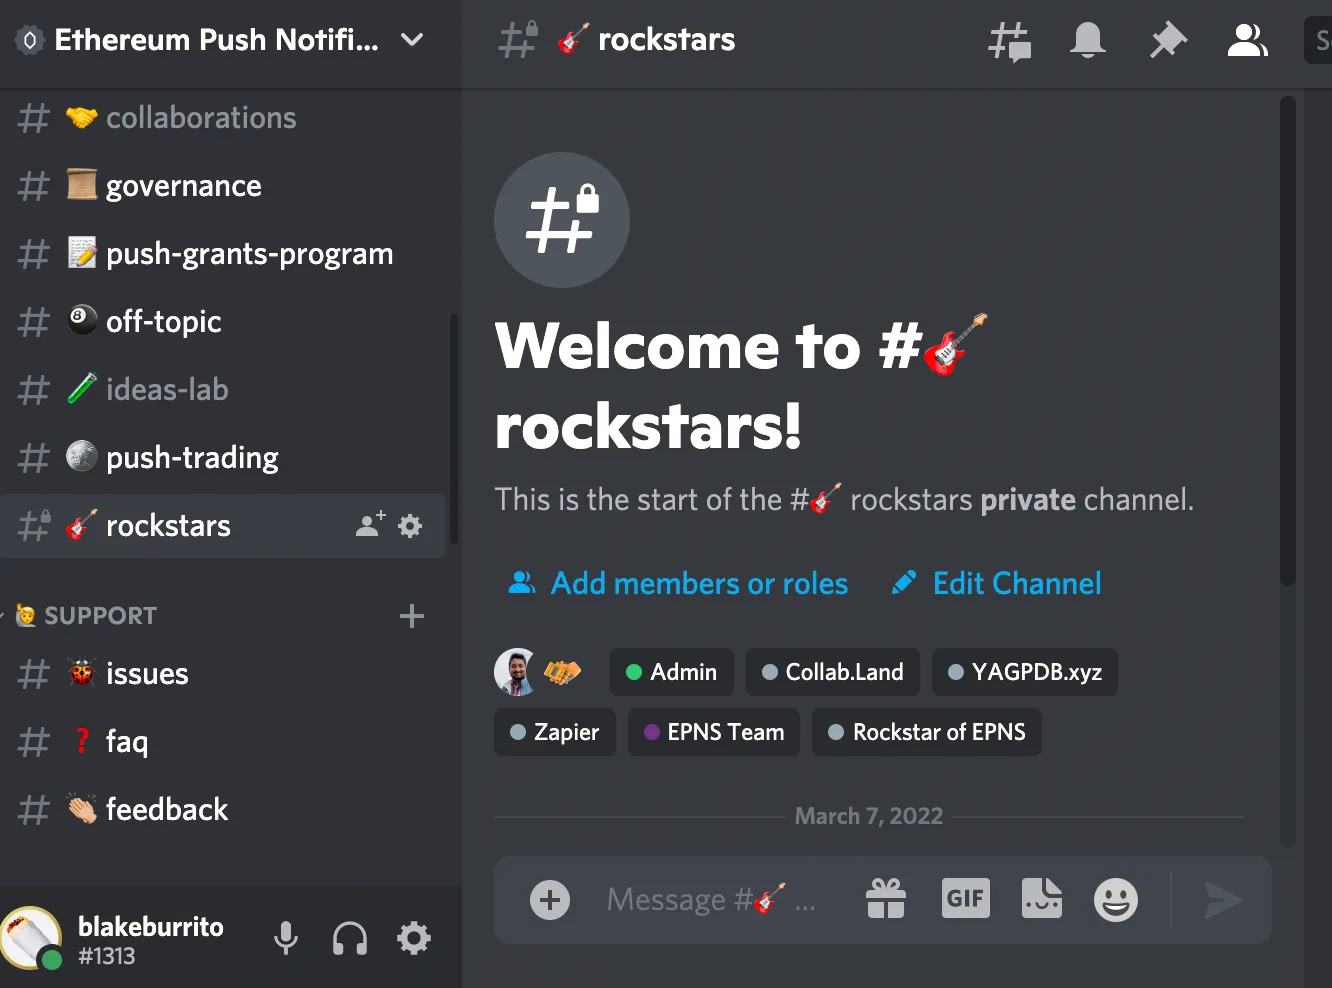 First image of Token-Gated Channel for Our Rockstar Community